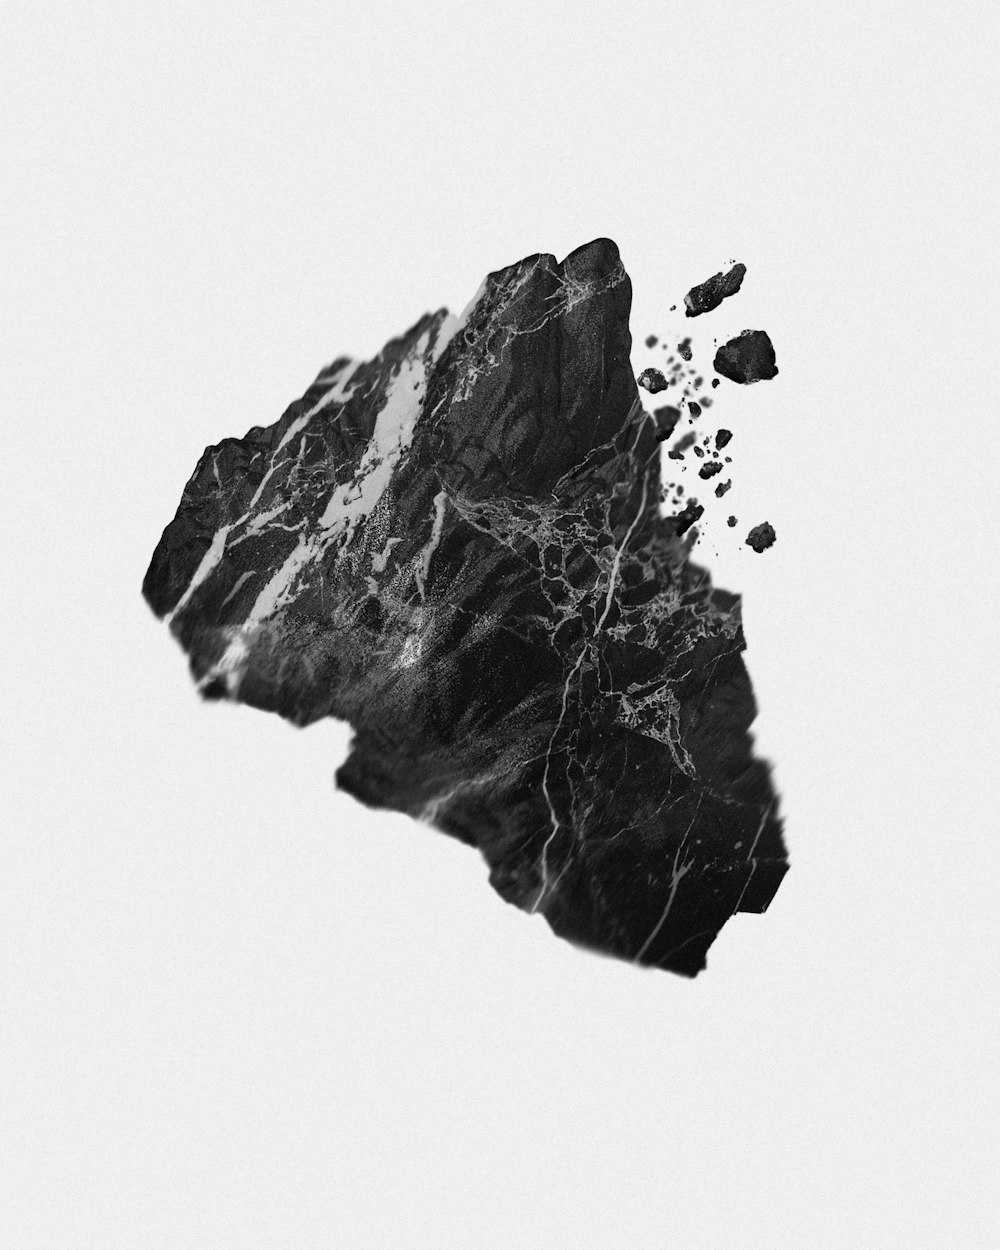 a black and white image of a rock